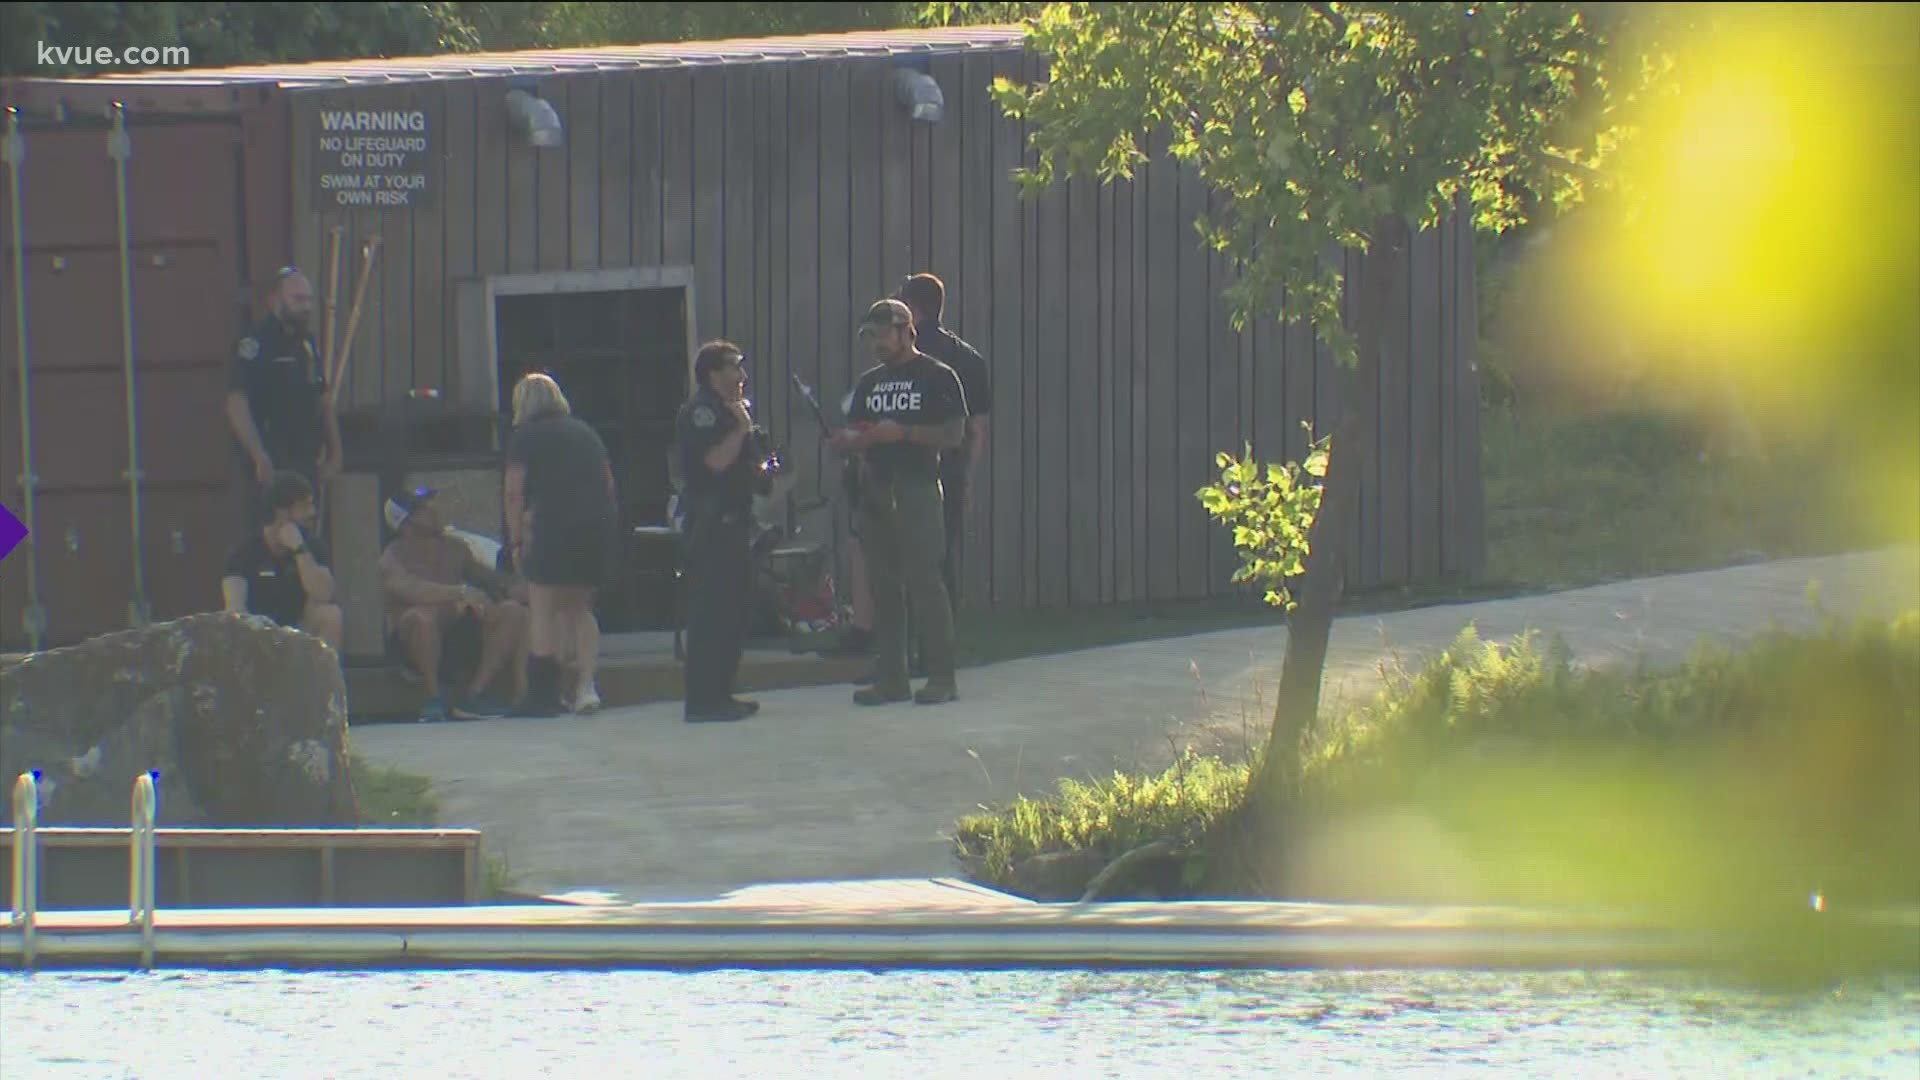 Austin police are investigating after a paddleboarder fell into a lake in North Austin and did not resurface.